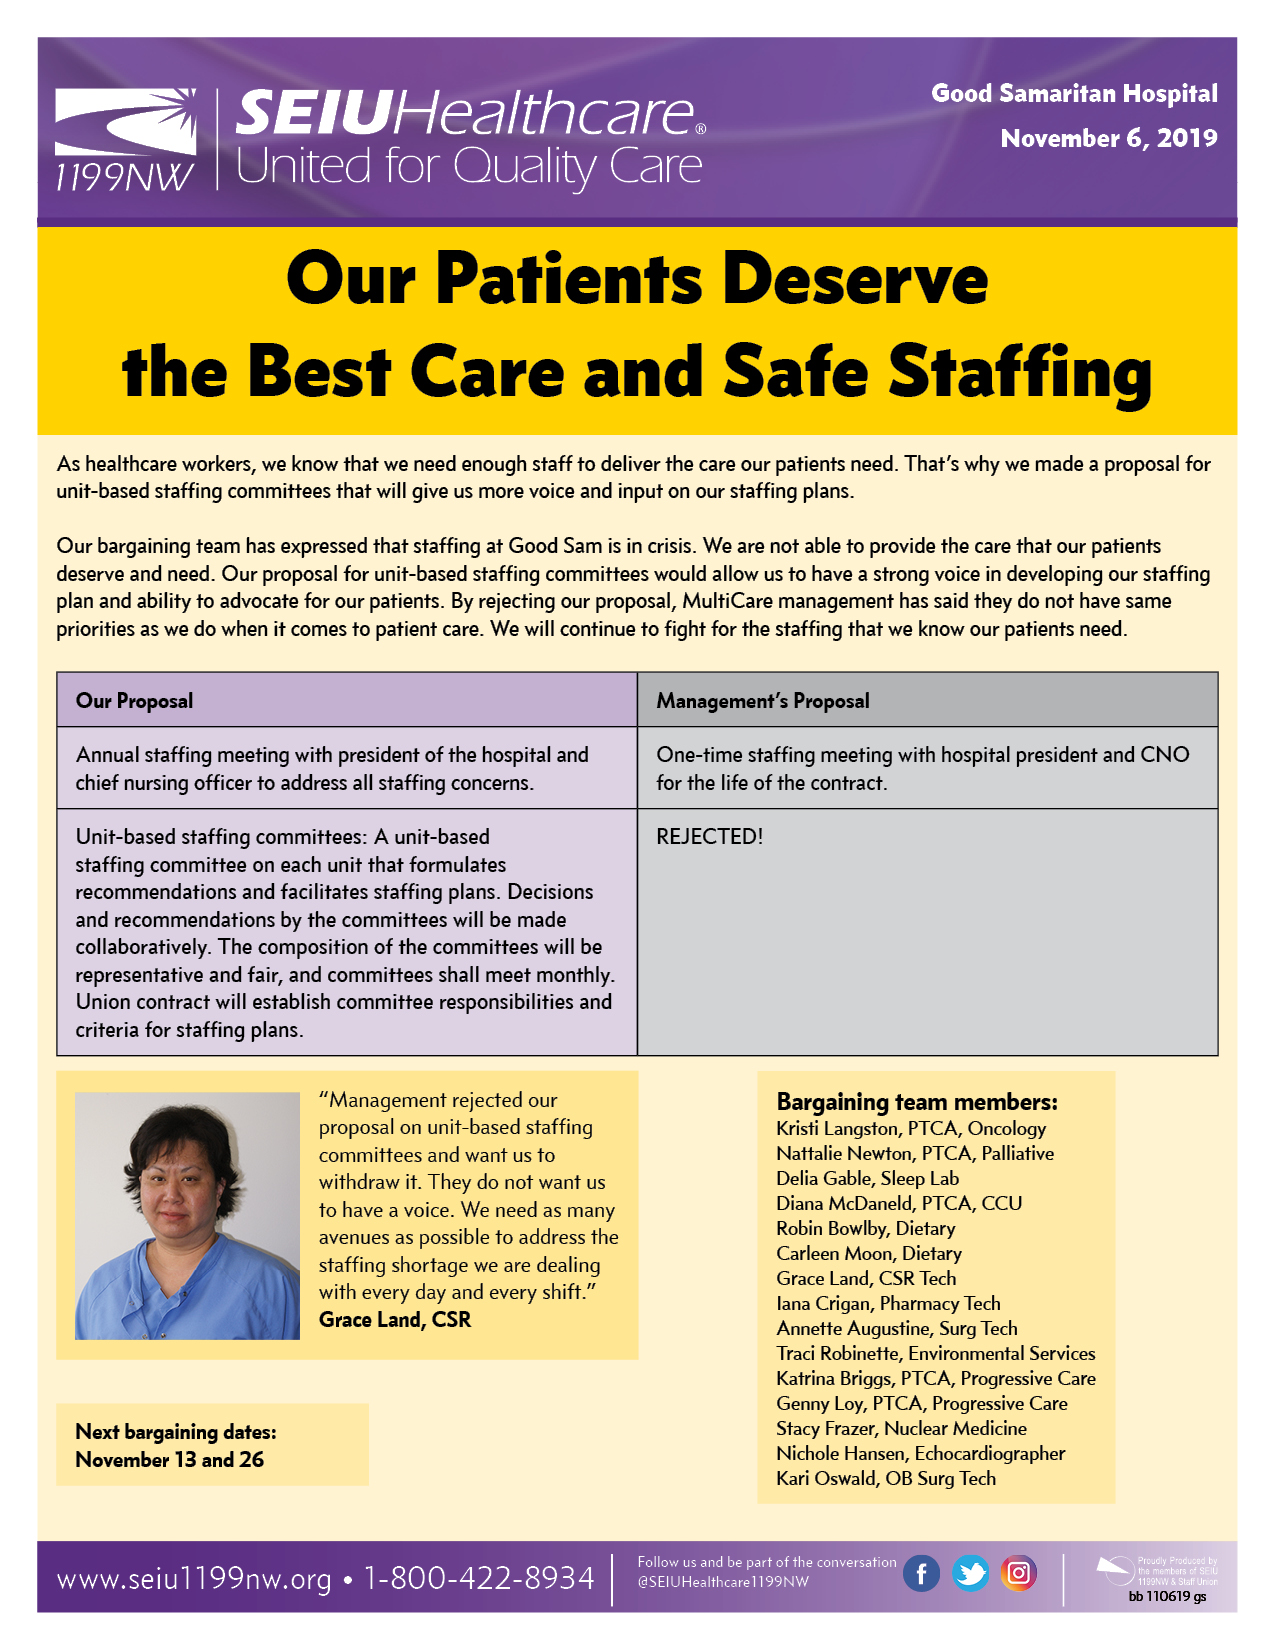 Our Patients Deserve the Best Care and Safe Staffing